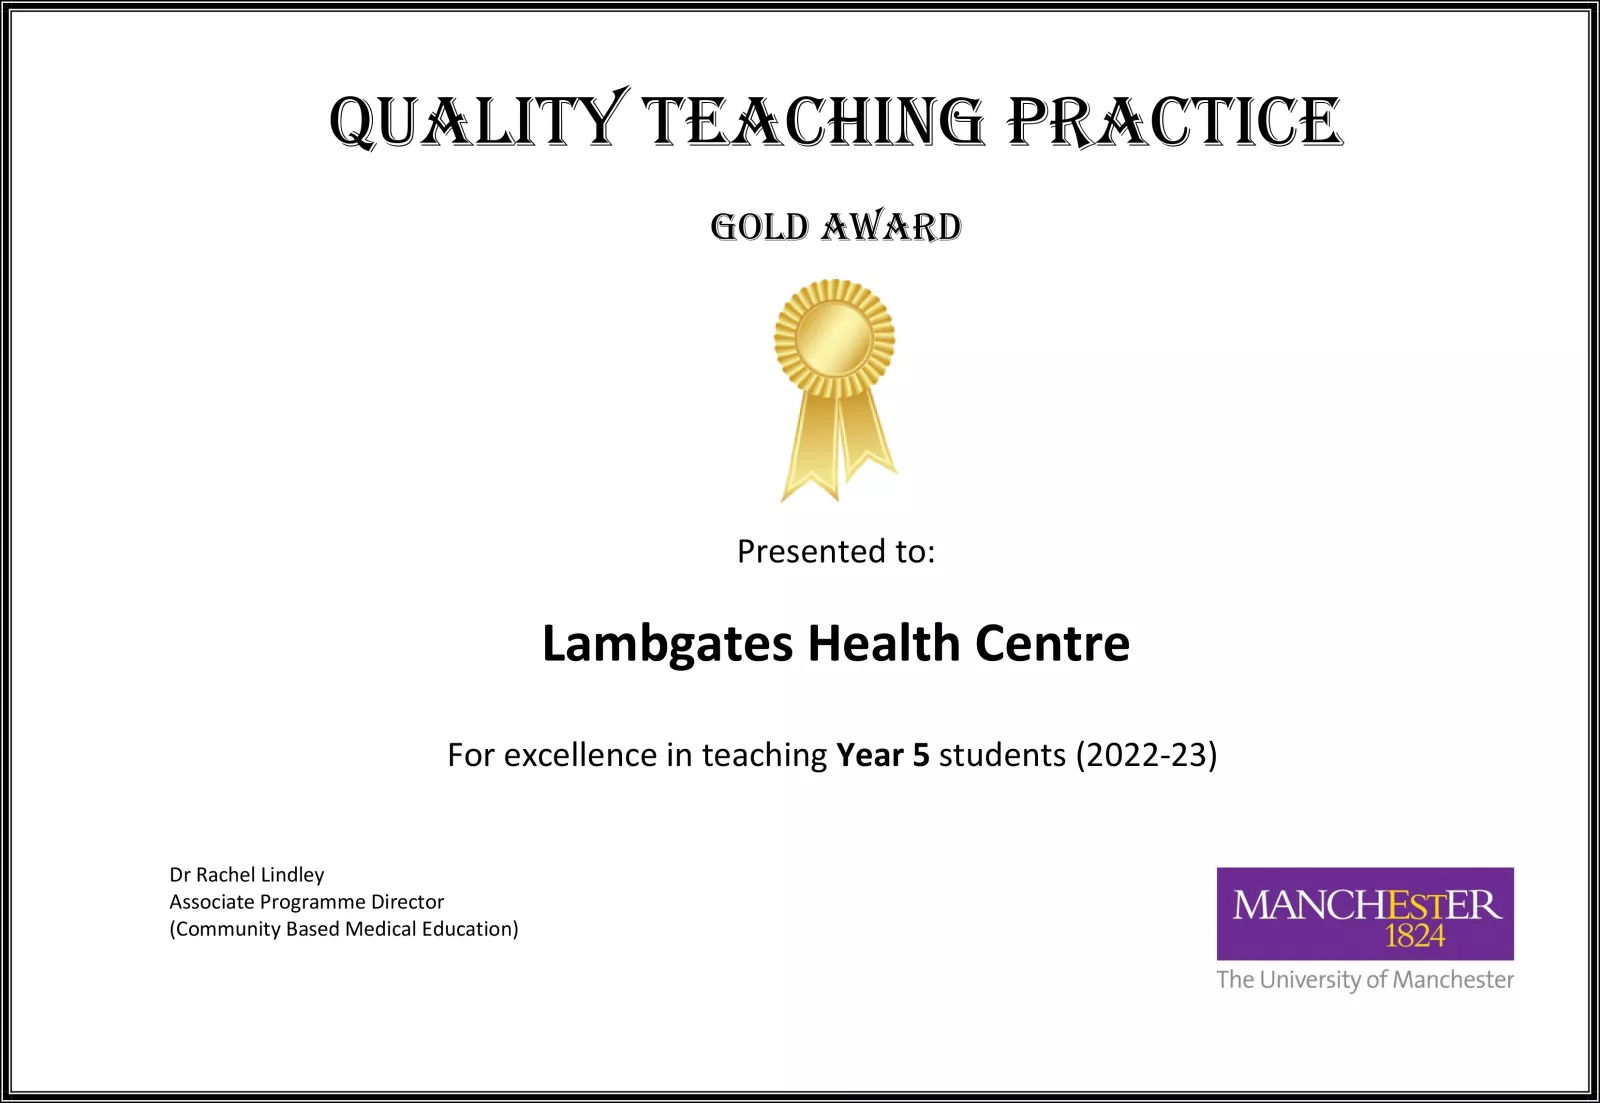 Image shows Quality Teaching Practice Gold Award Presented to: Lambgates Health Centre for excellence in teaching Year 5 students (2022-23)